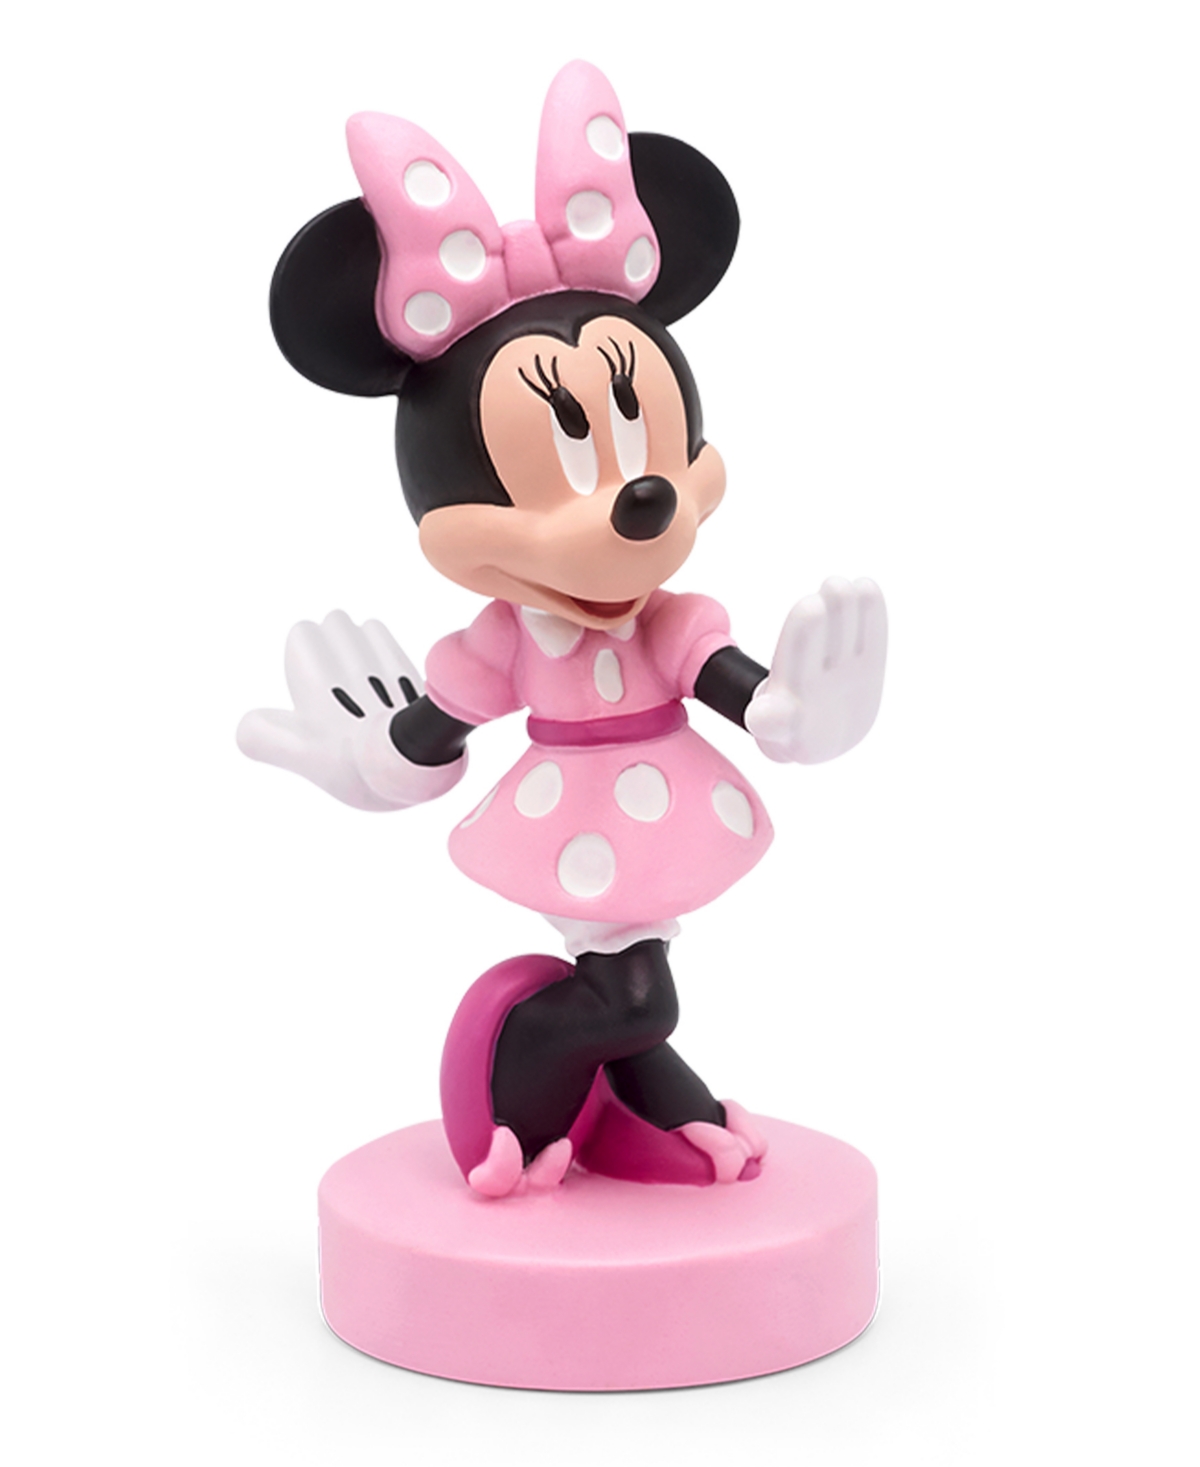 Tonies Kids' Disney Minnie Mouse Audio Play Figurine In No Color